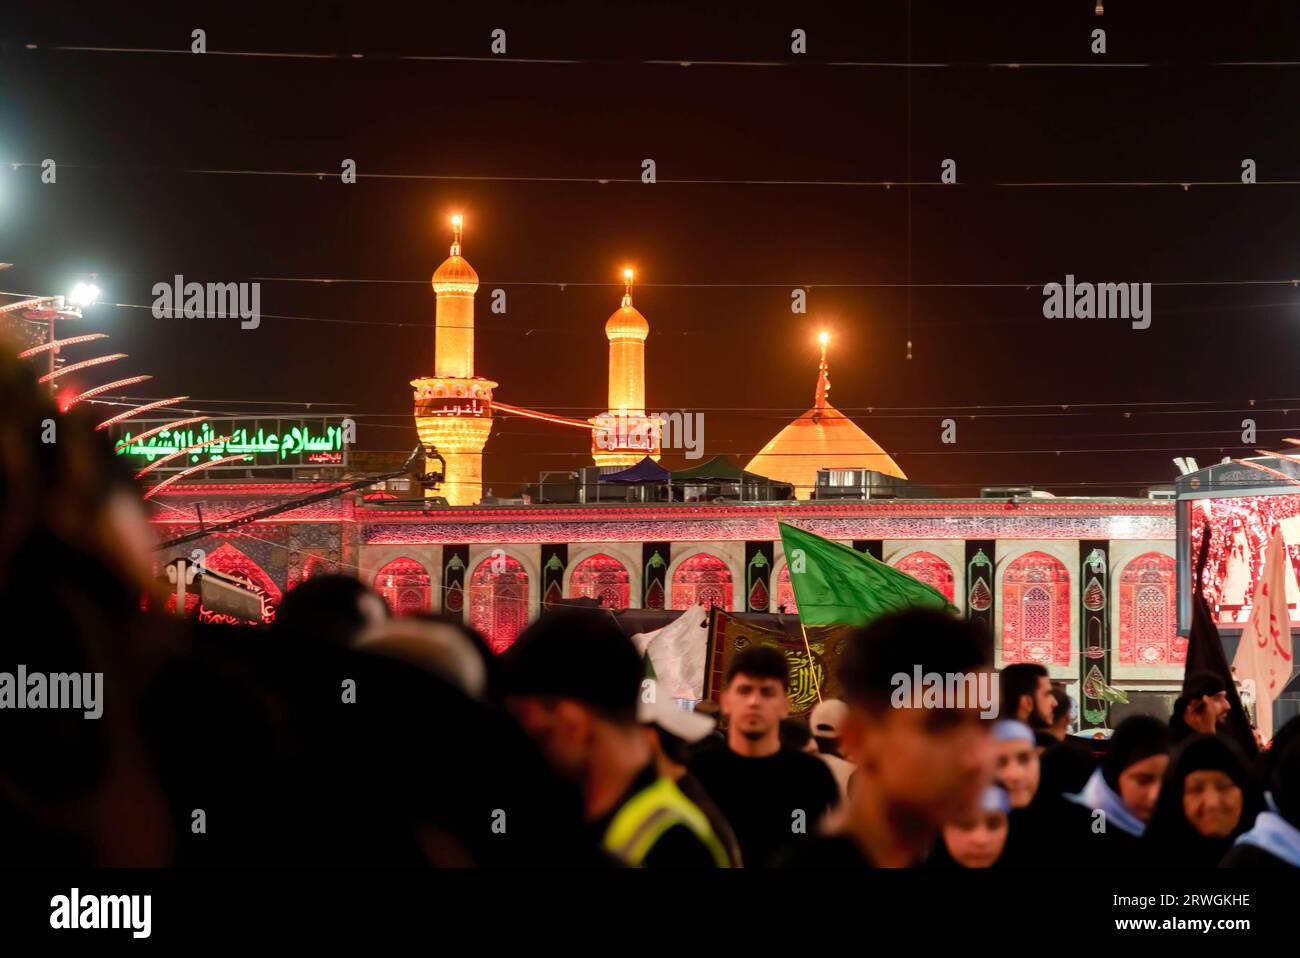 View of Shrine of Imam Hussein on Arbaeen day in Karbala. Every year, millions of Shia Muslims and some from other faiths undertake a 20-day pilgrimage on foot from various cities in Iraq and Iran to the holy city of Karbala. This pilgrimage is in remembrance of Imam Hussein, the grandson of the Prophet Muhammad, who died in a battle in 680 AD. On the 40th day of mourning for Hussein, known as Arbaeen, pilgrims converge in Karbala to pay tribute at his shrine. Along the way, volunteers provide food, water, and shelter, and villagers open their doors to the pilgrims. (Photo by Idrees Abbas / SO Stock Photo